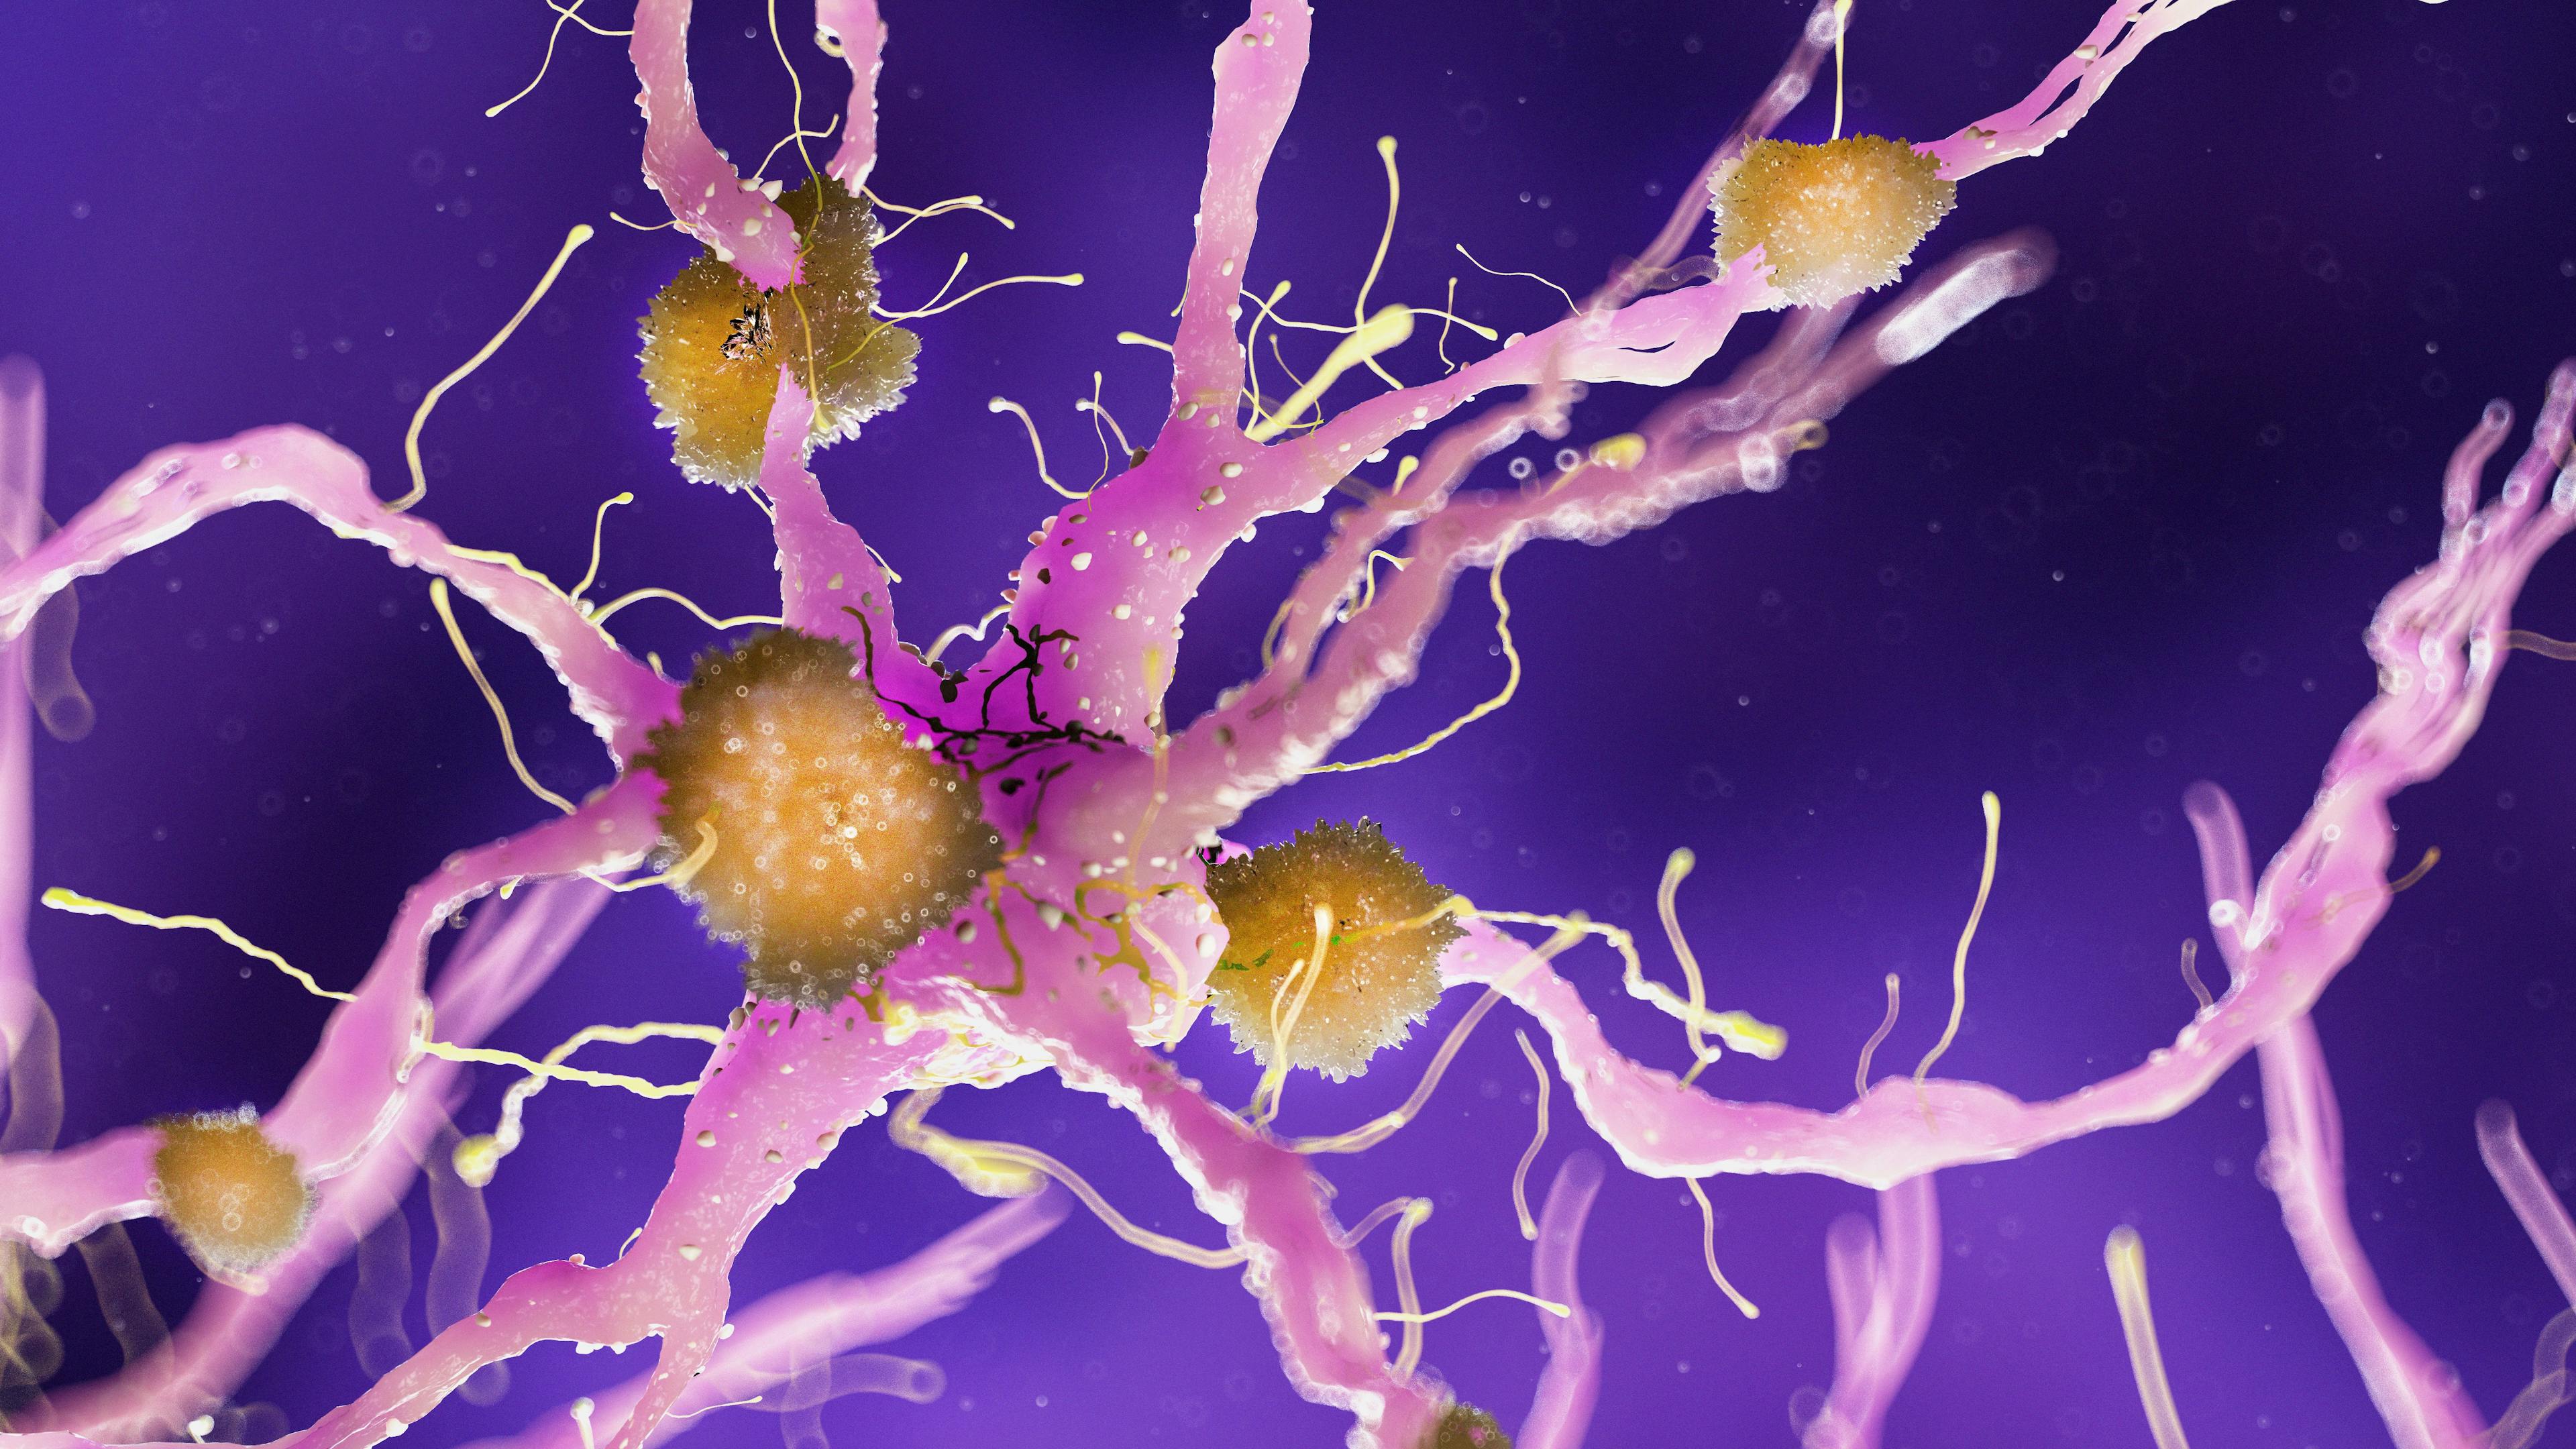 Plasma exchange with albumin could slow Alzheimer’s disease